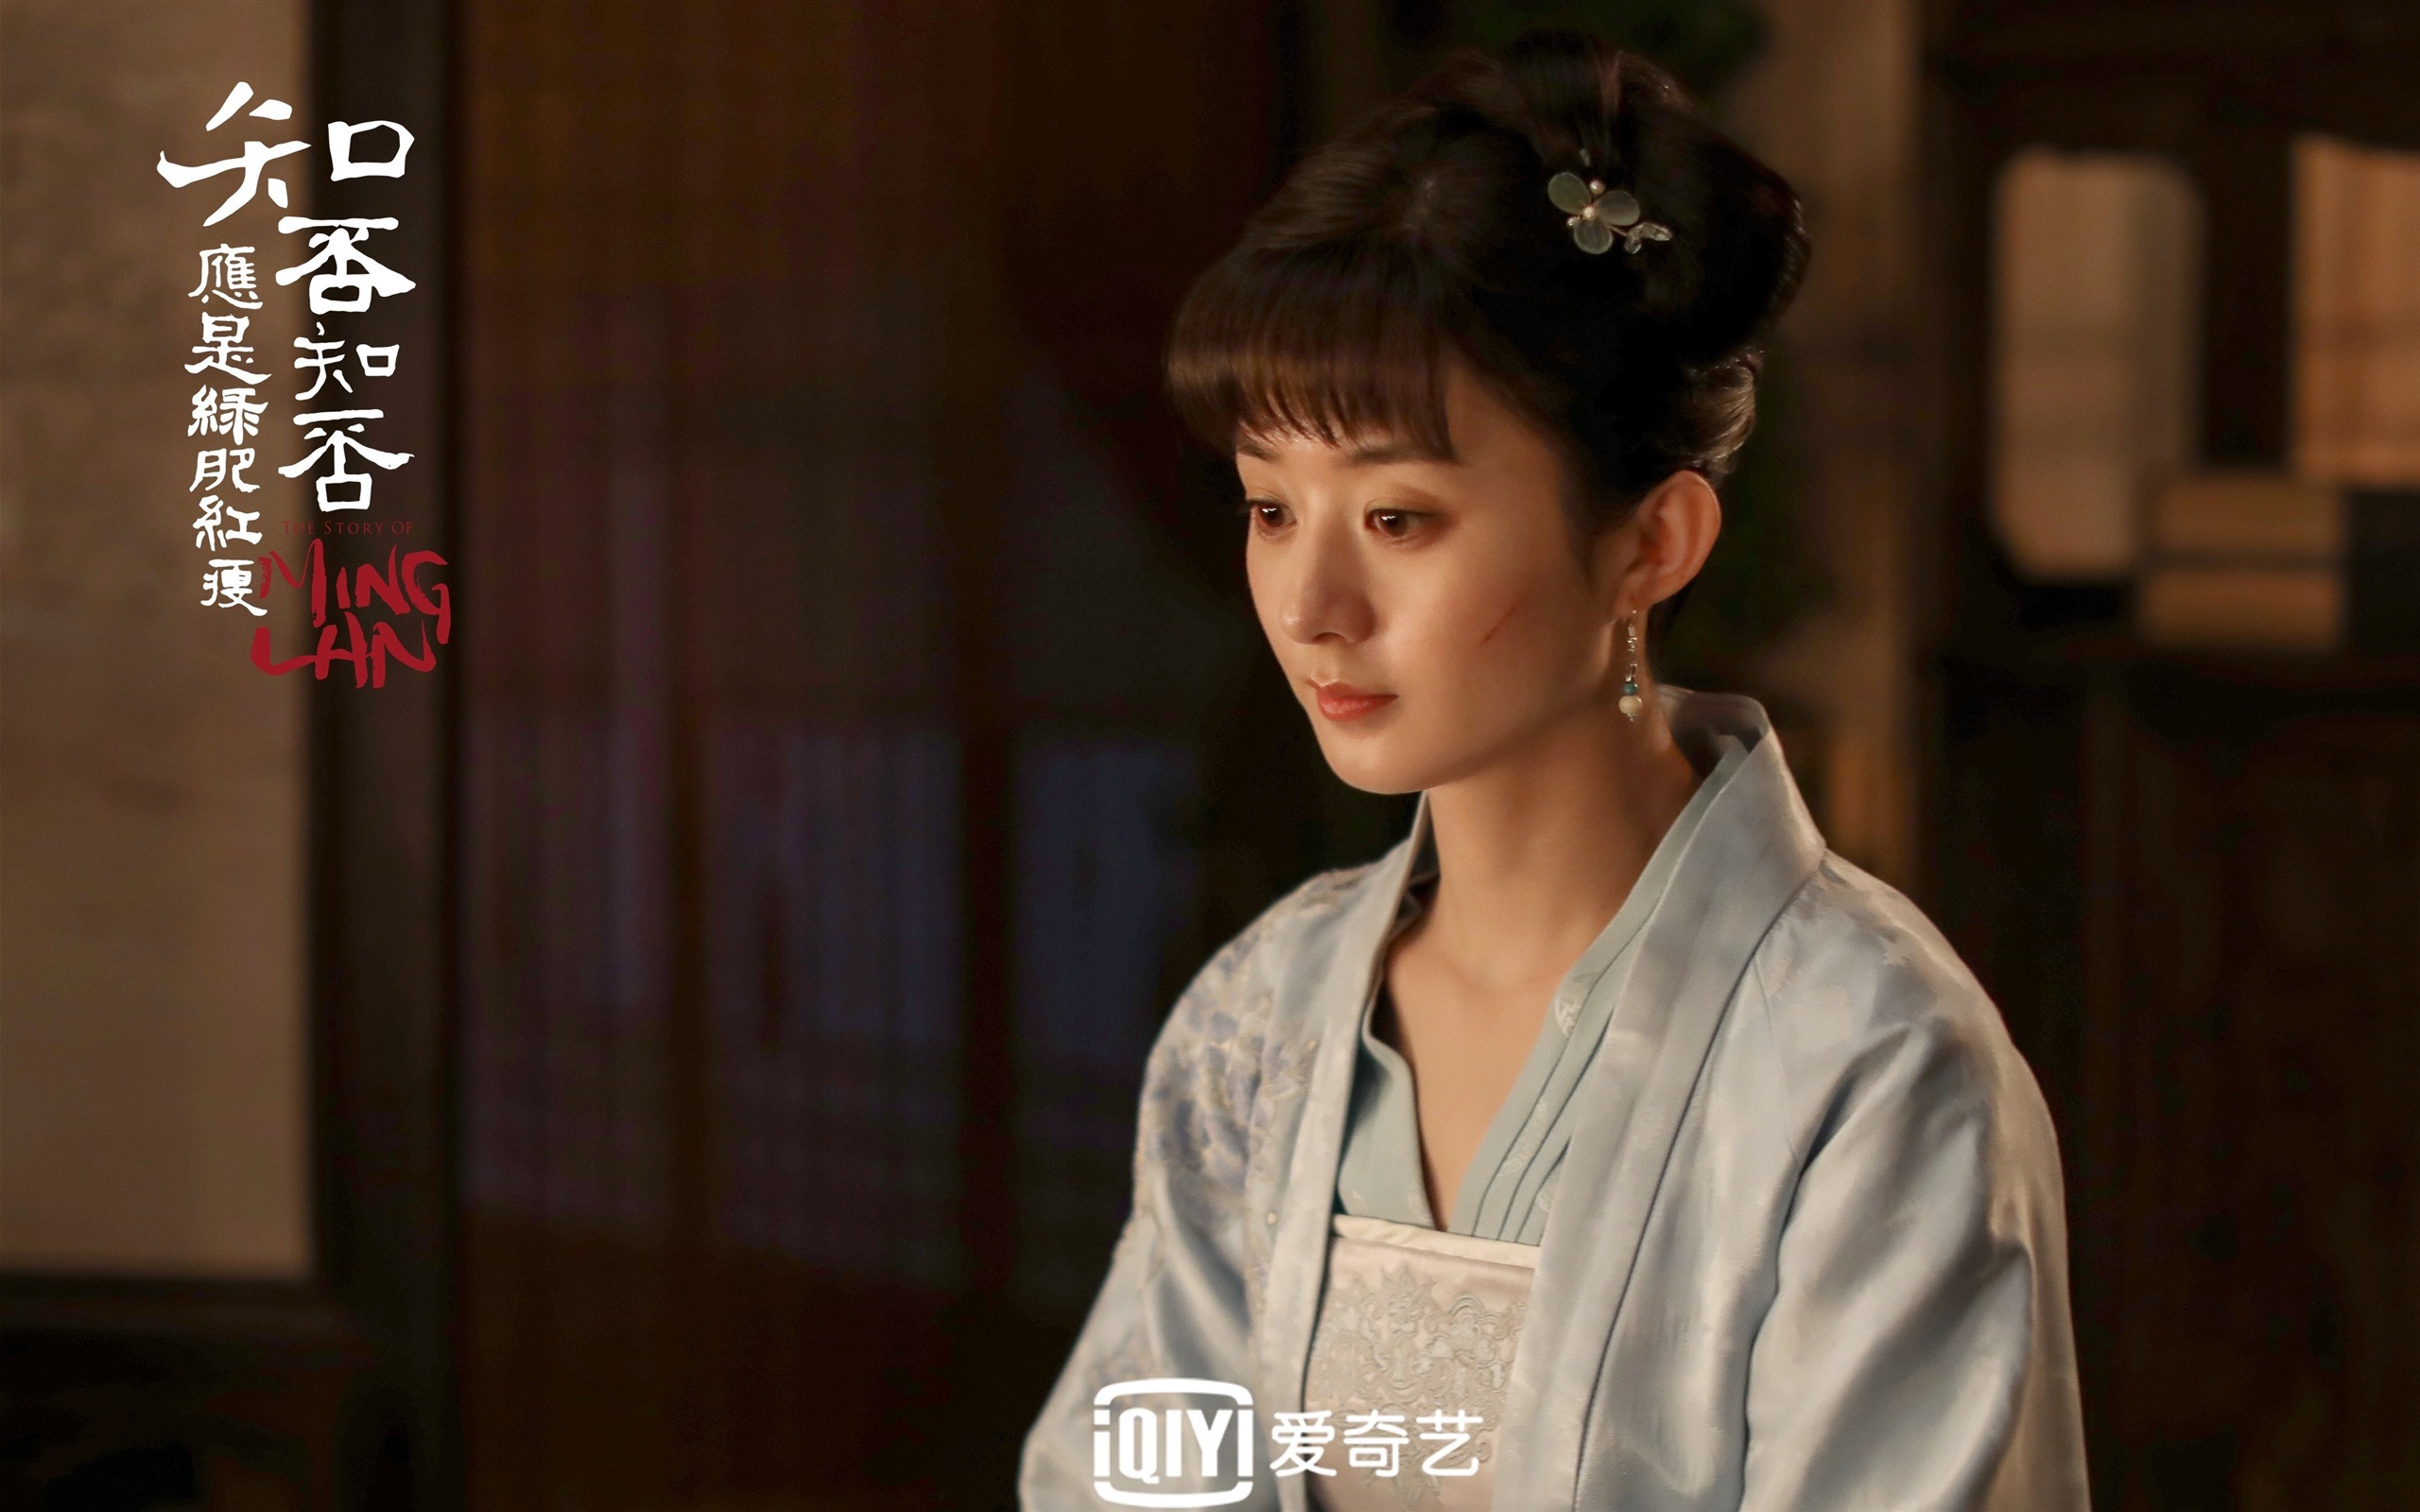 The Story Of MingLan, TV series HD wallpapers #36 - 2560x1600